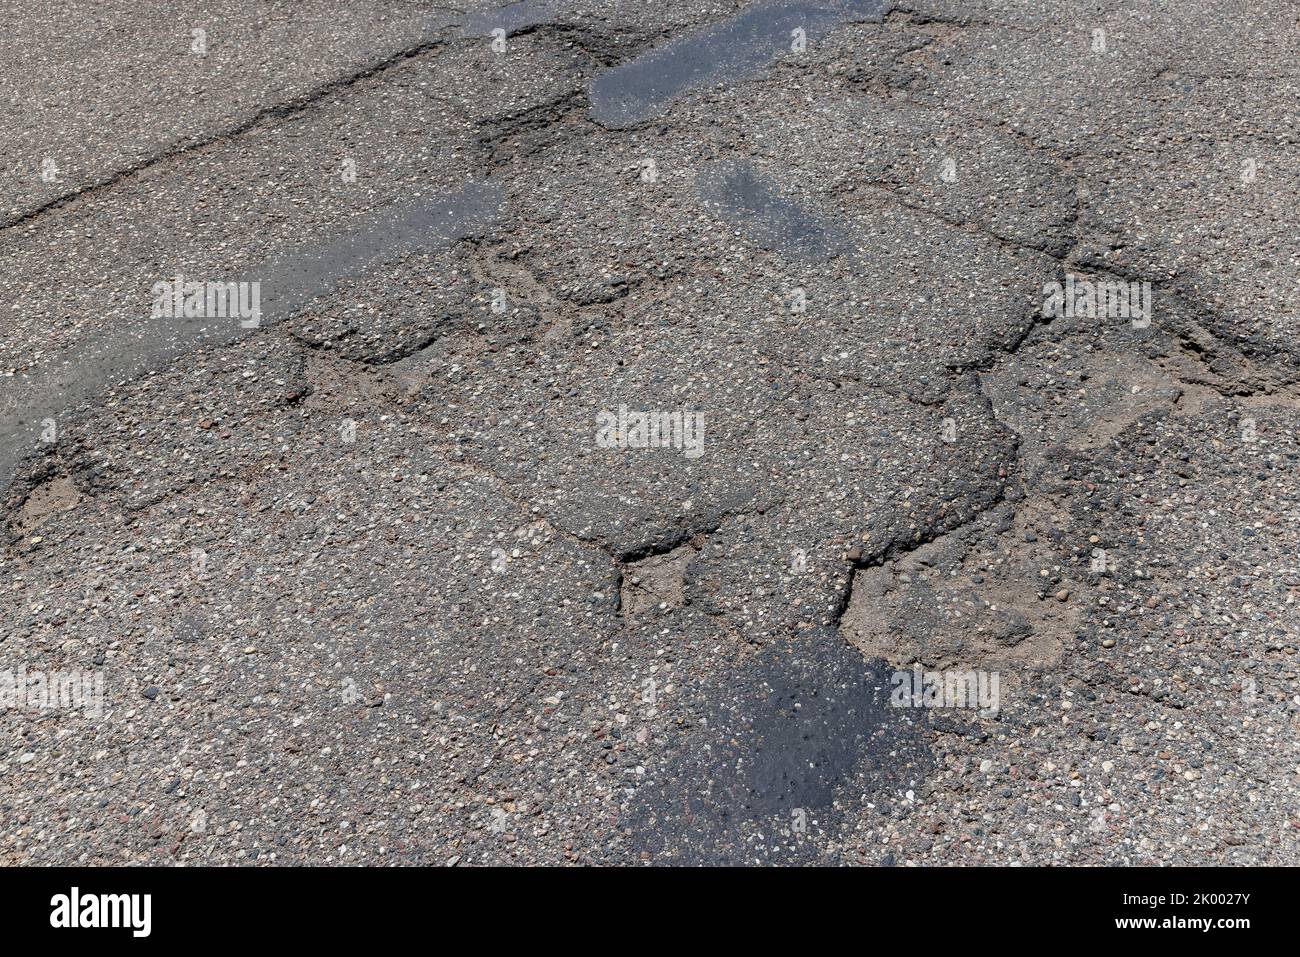 An old paved road with a lot of holes and damage, very poor quality of the highway with damaged non-quality asphalt Stock Photo